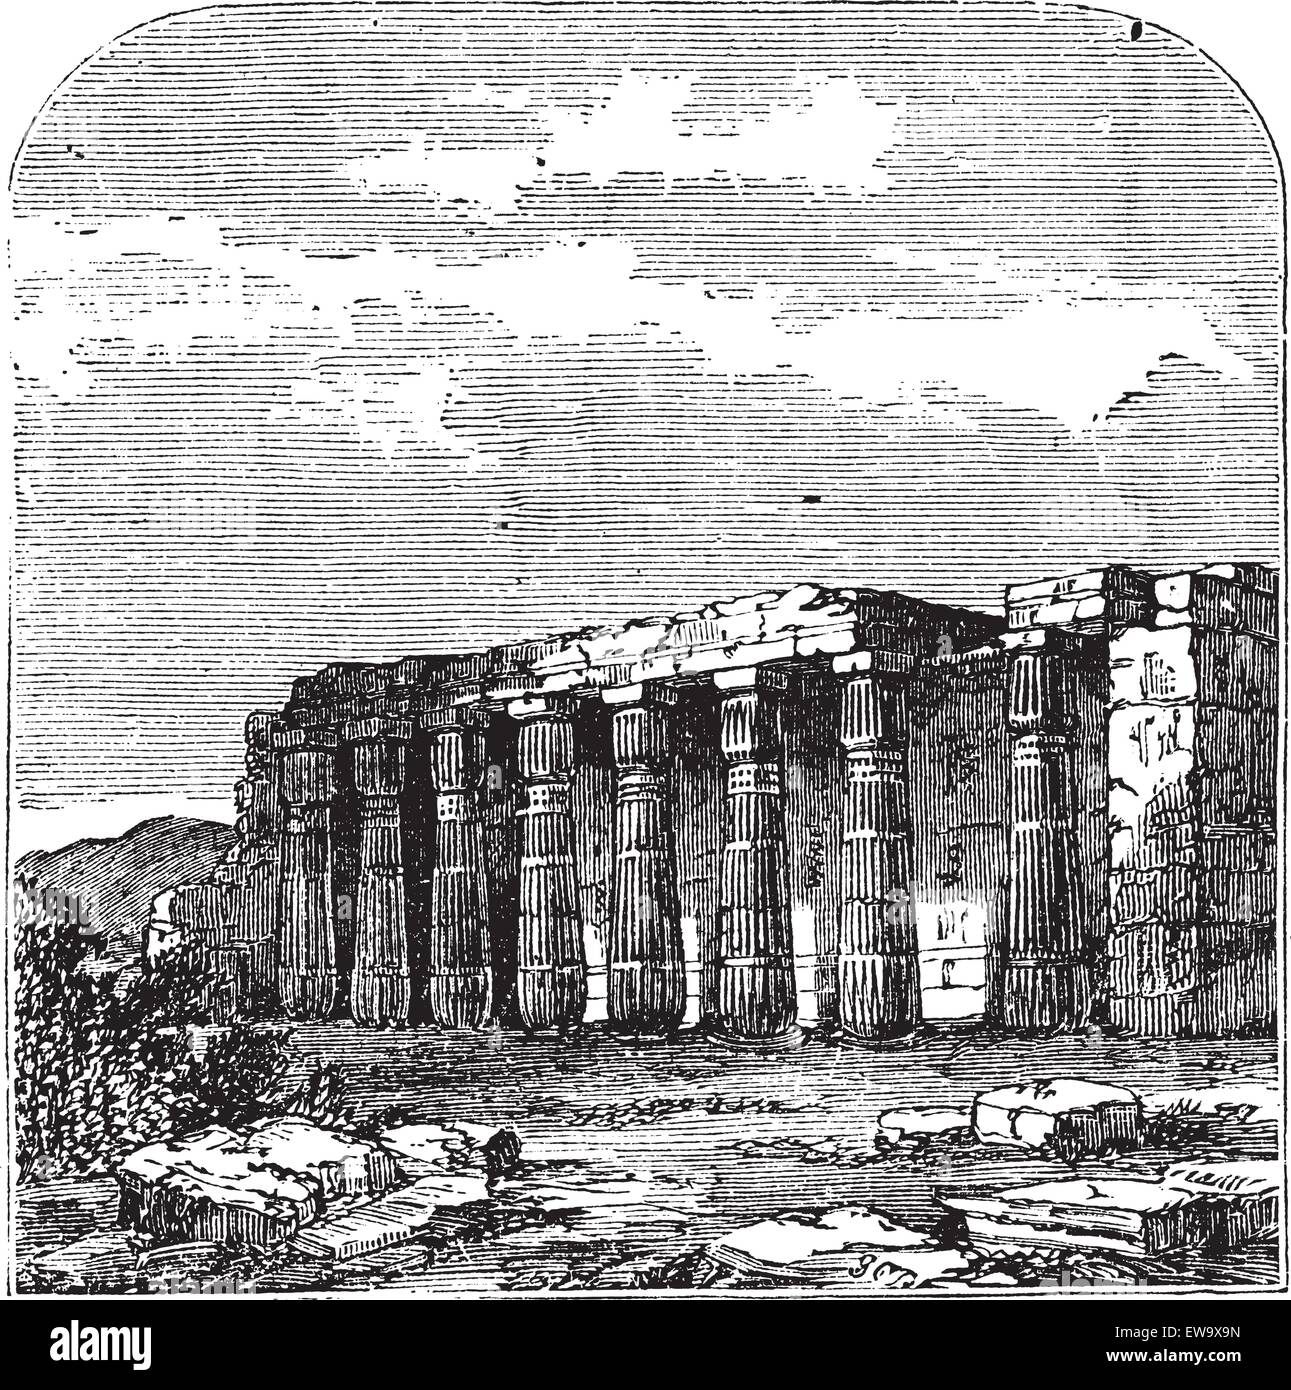 Temple of Luxor (or Quorenth) ruins, in Thebes, Egypt. Vintage engraving. Old engraved illustration of the columns at Luxor temple. Stock Vector